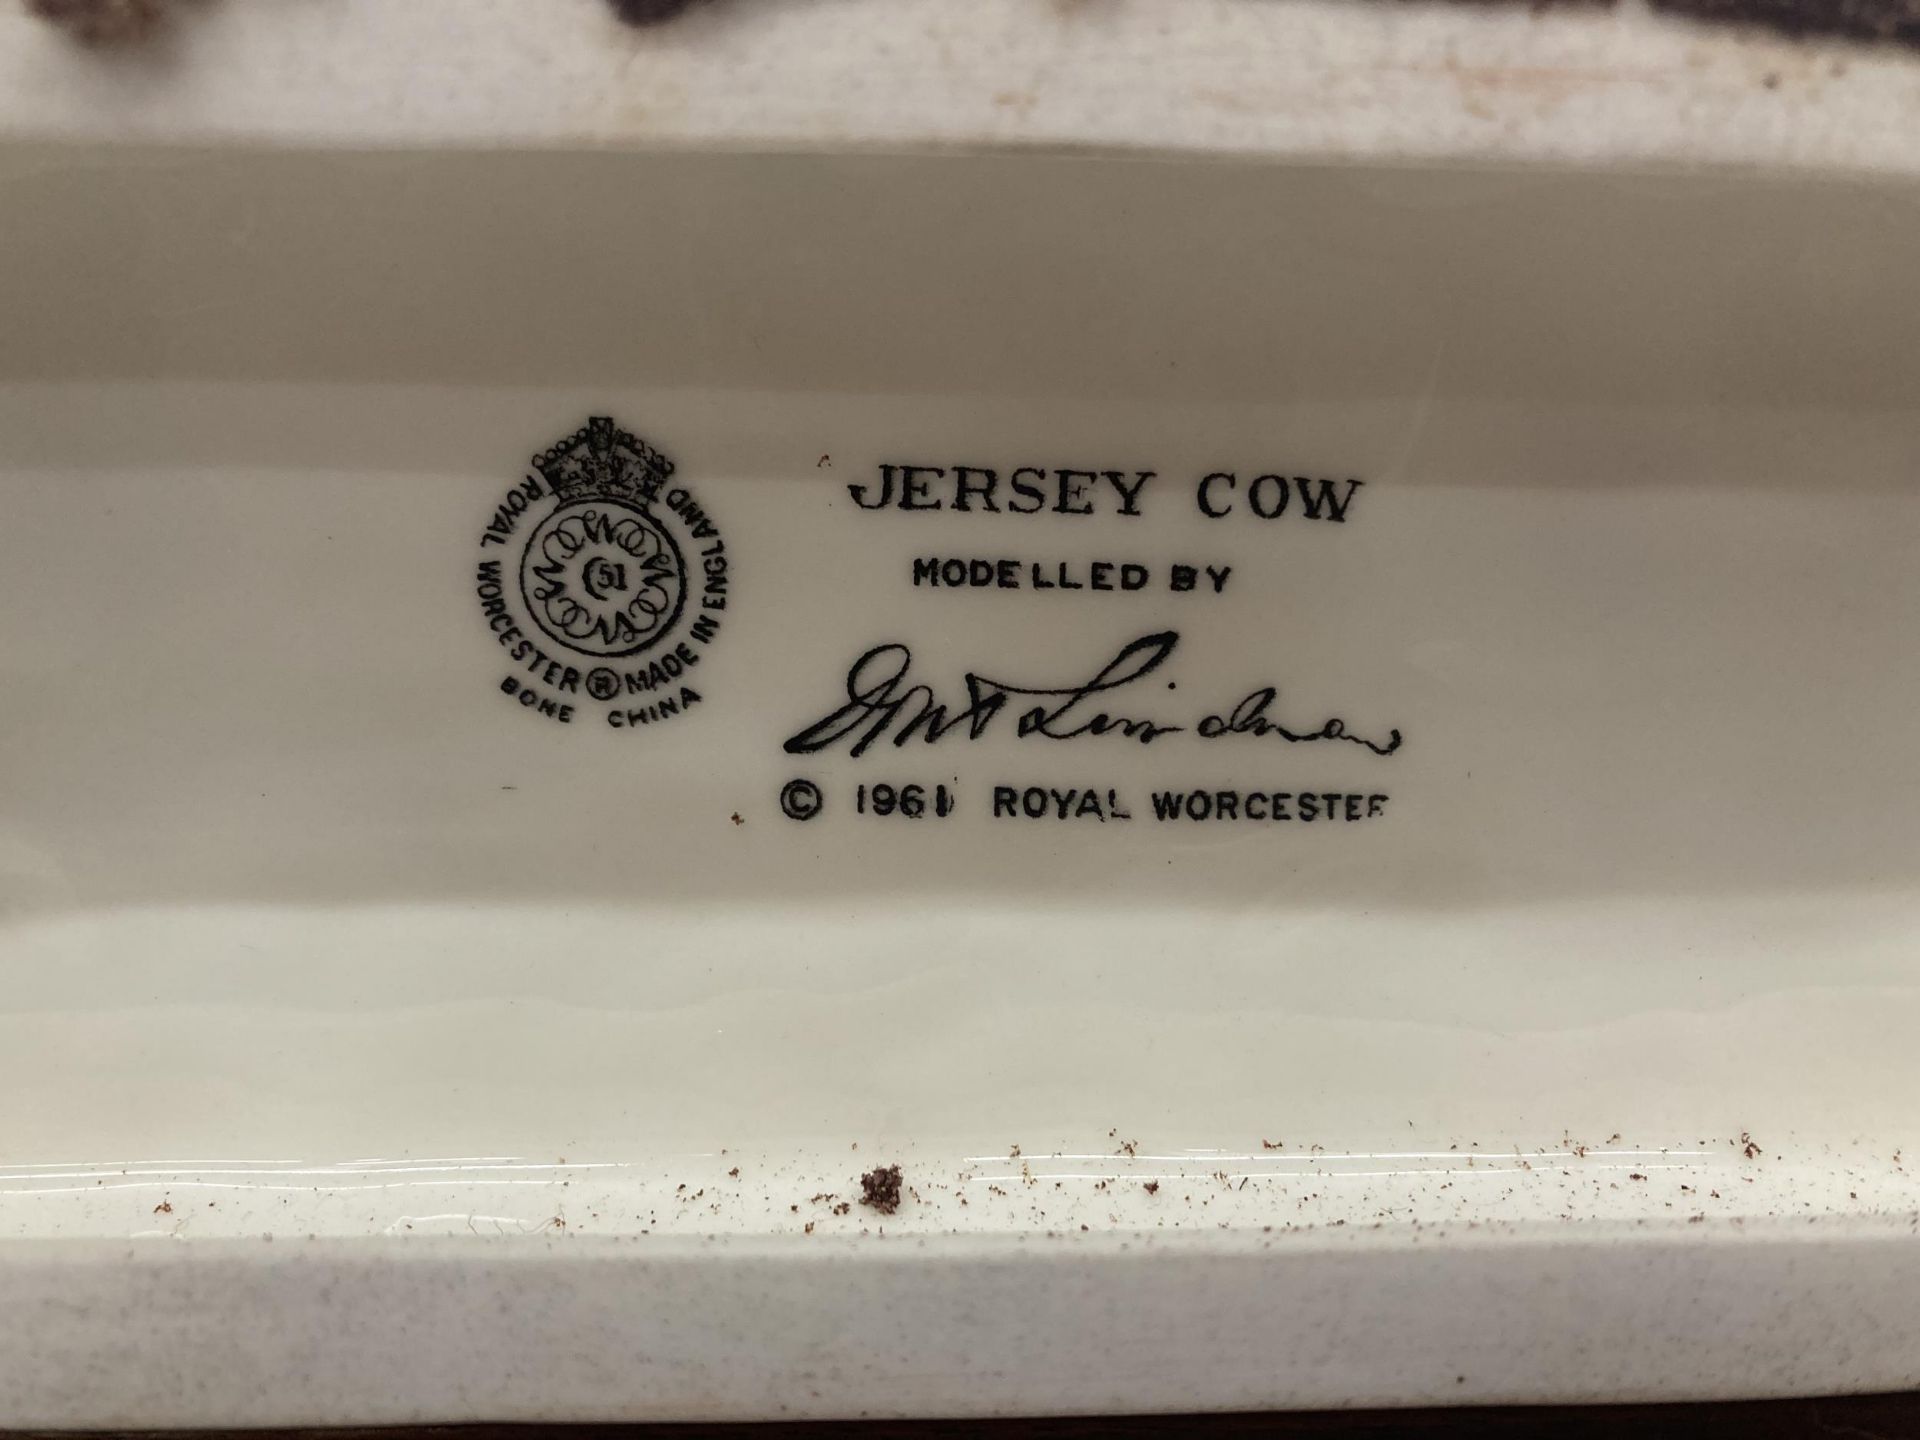 A ROYAL WORCESTER MODEL OF A JERSEY COW MODELLED BY DORIS LINDNER AND PRODUCED IN A LIMITED - Image 5 of 5